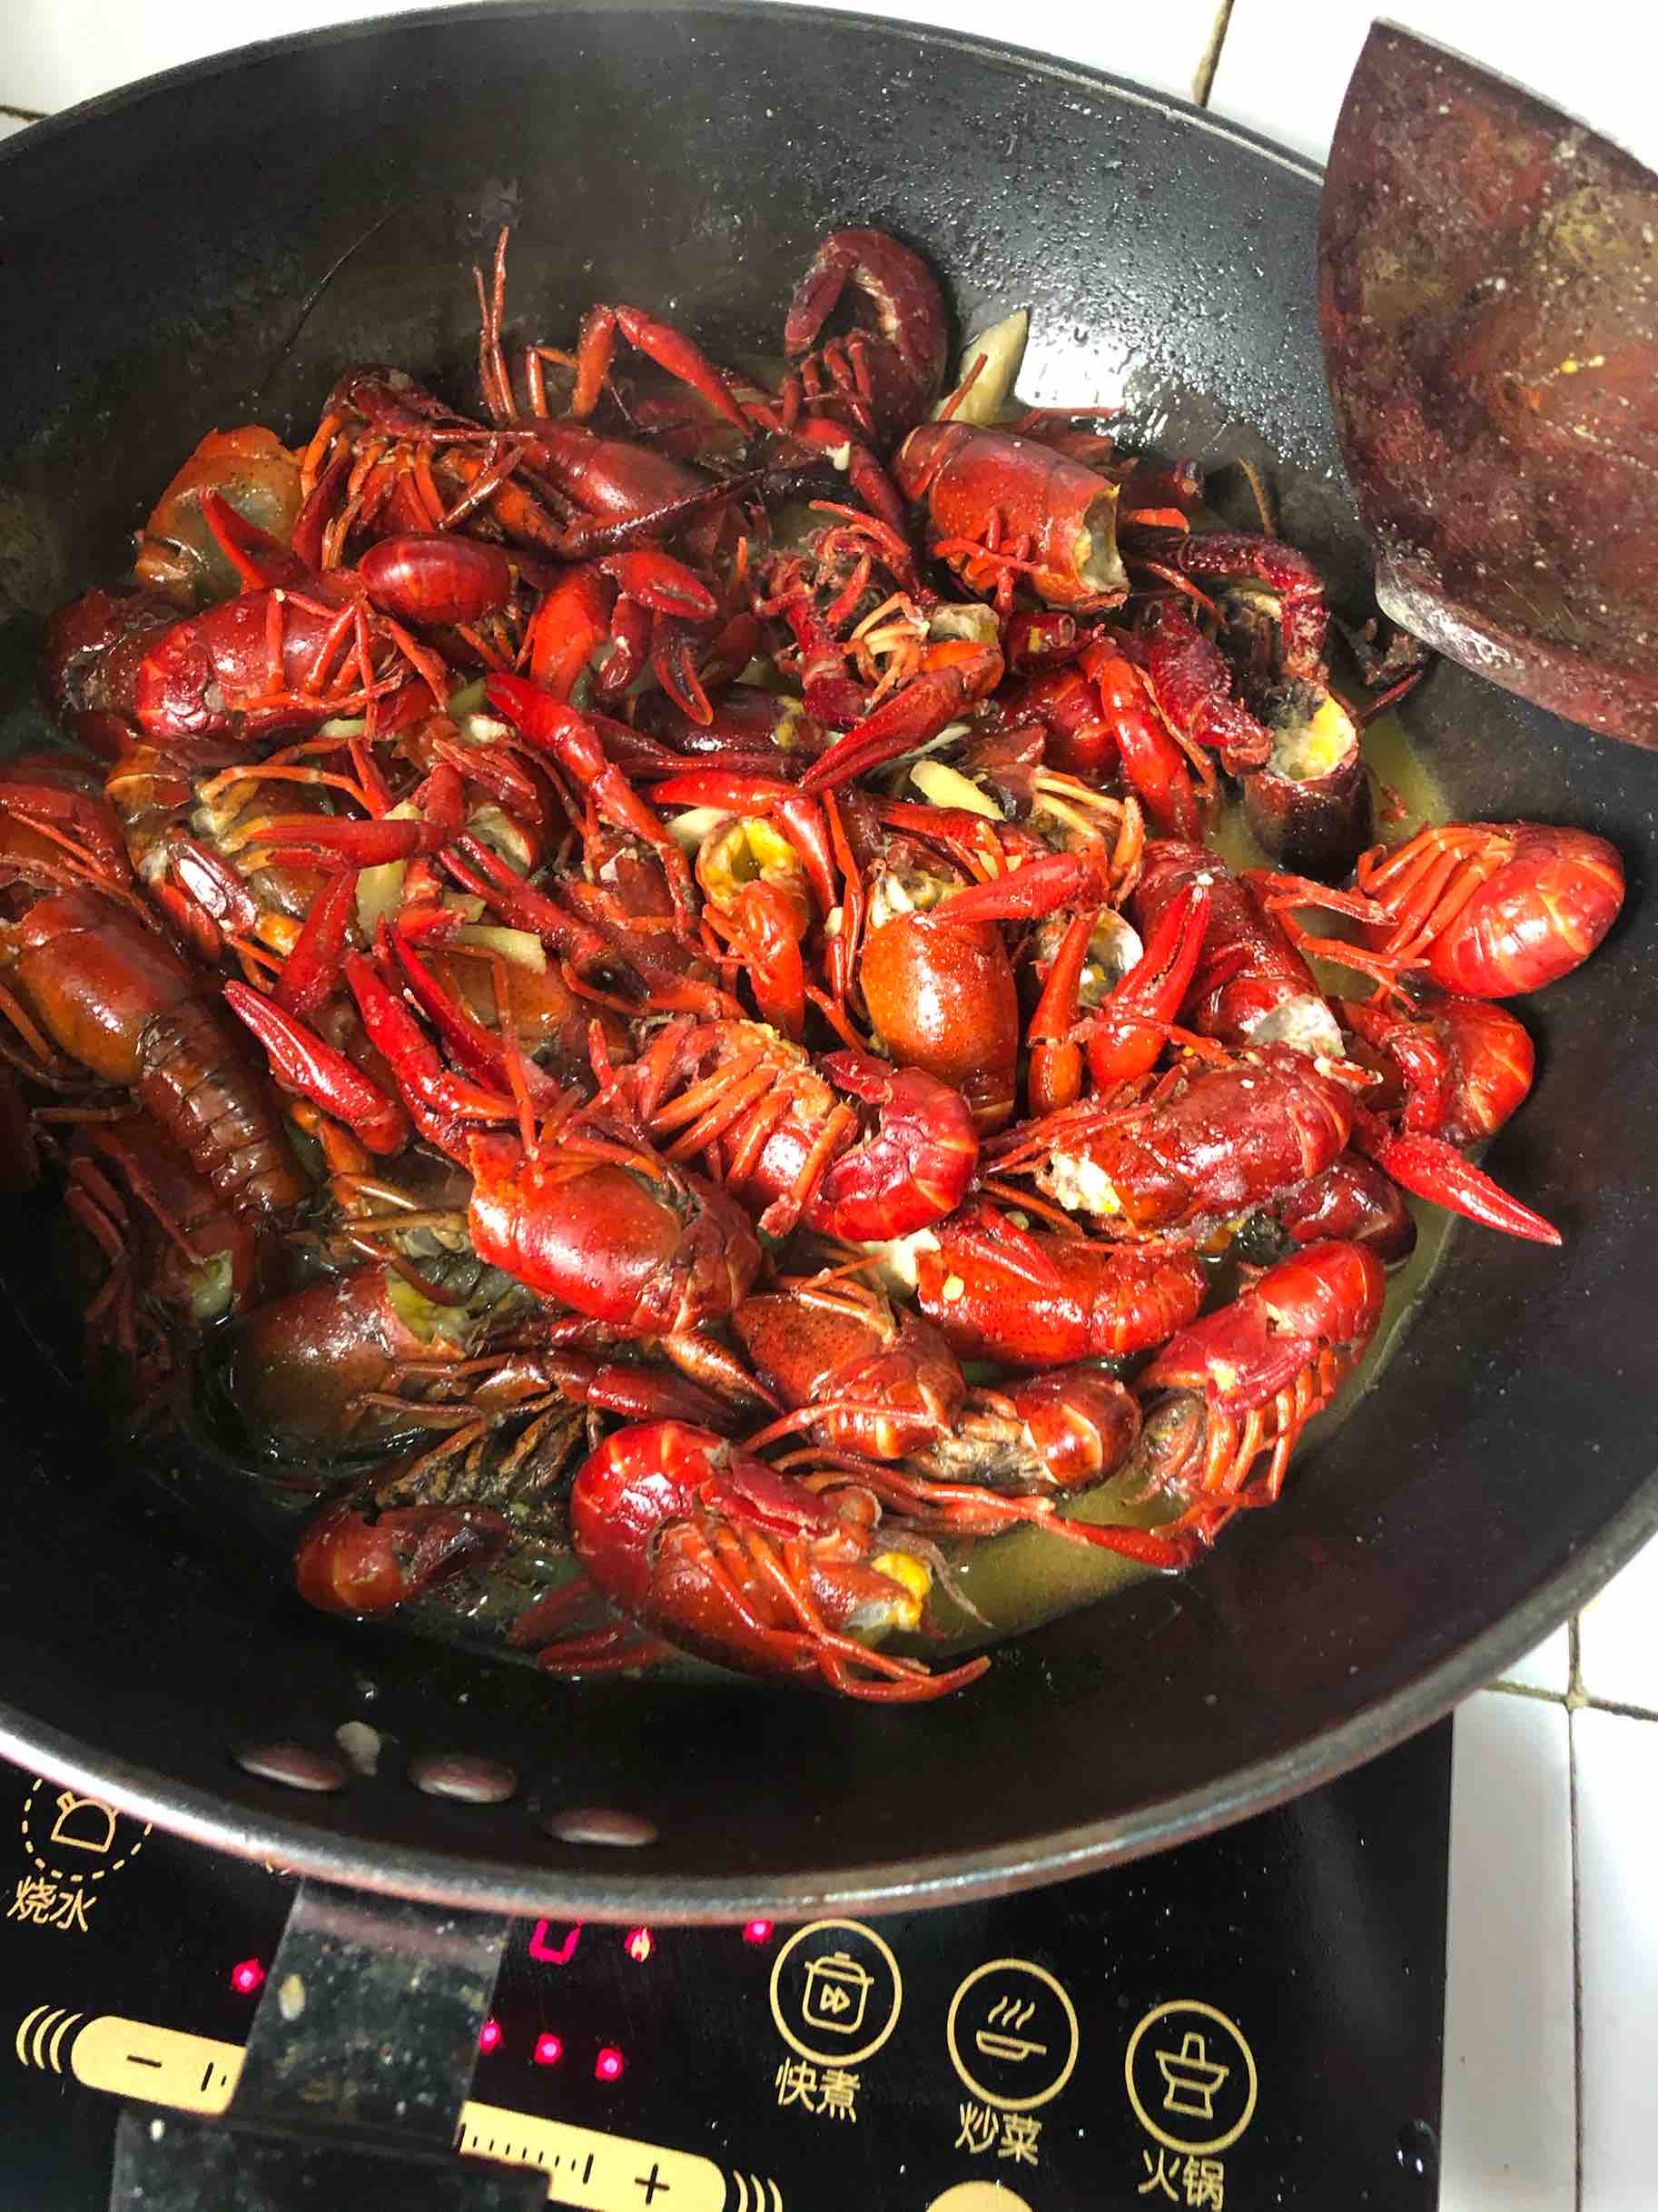 Spicy Lobster recipe